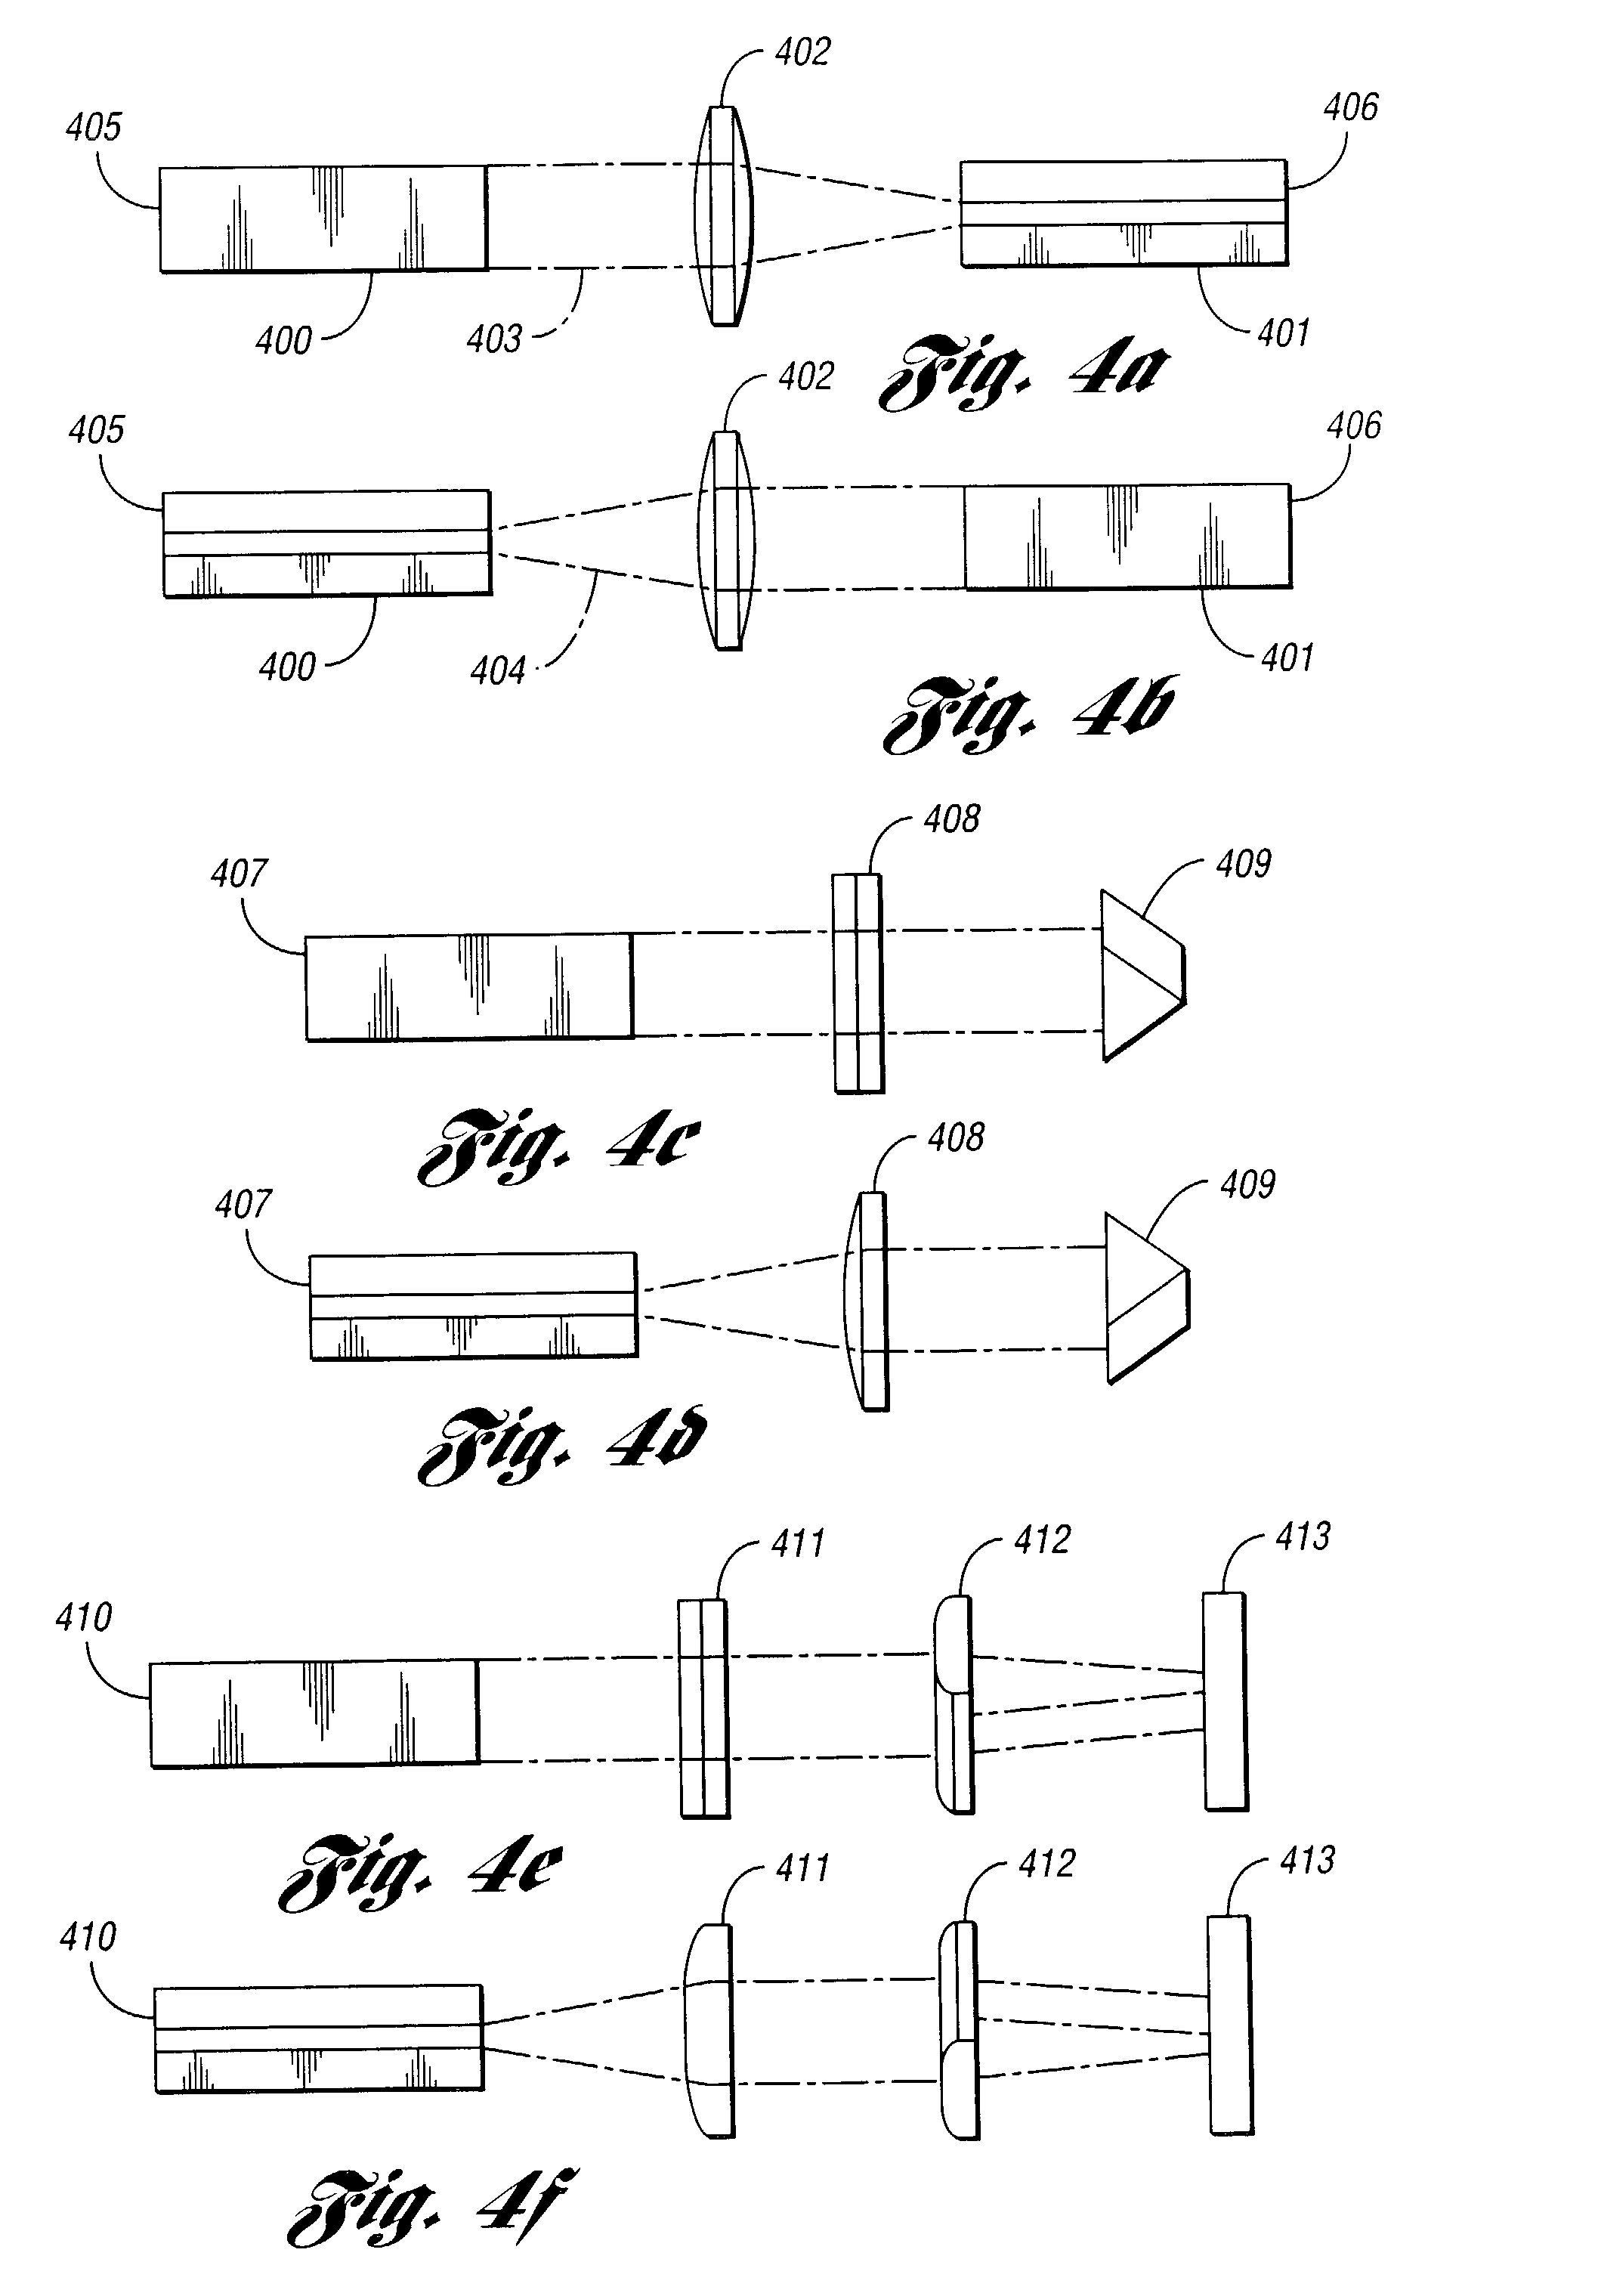 Laser based material processing methods and scalable architecture for material processing